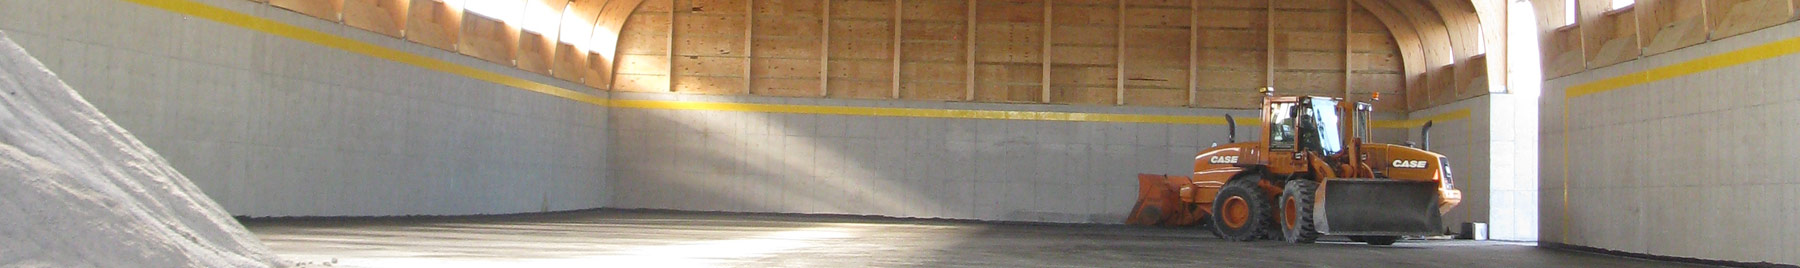 Salt Storage Facility interior construction completed